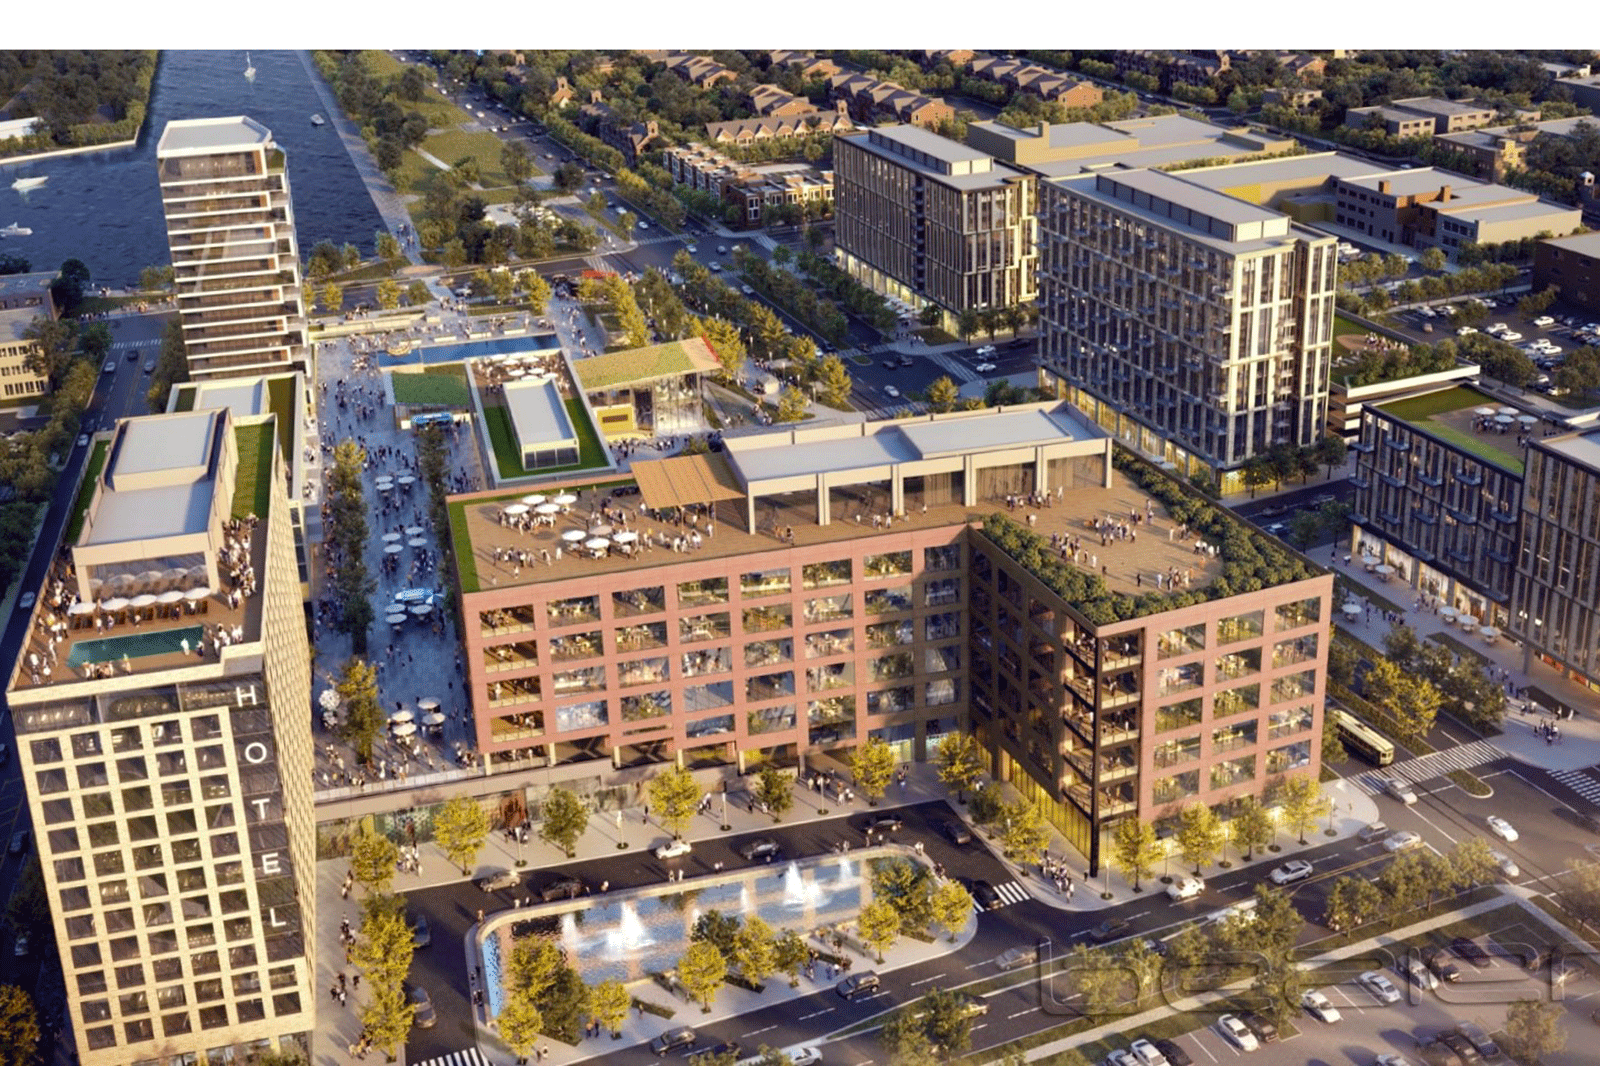 $450M development in Kenosha moves forward, could reshape downtown area